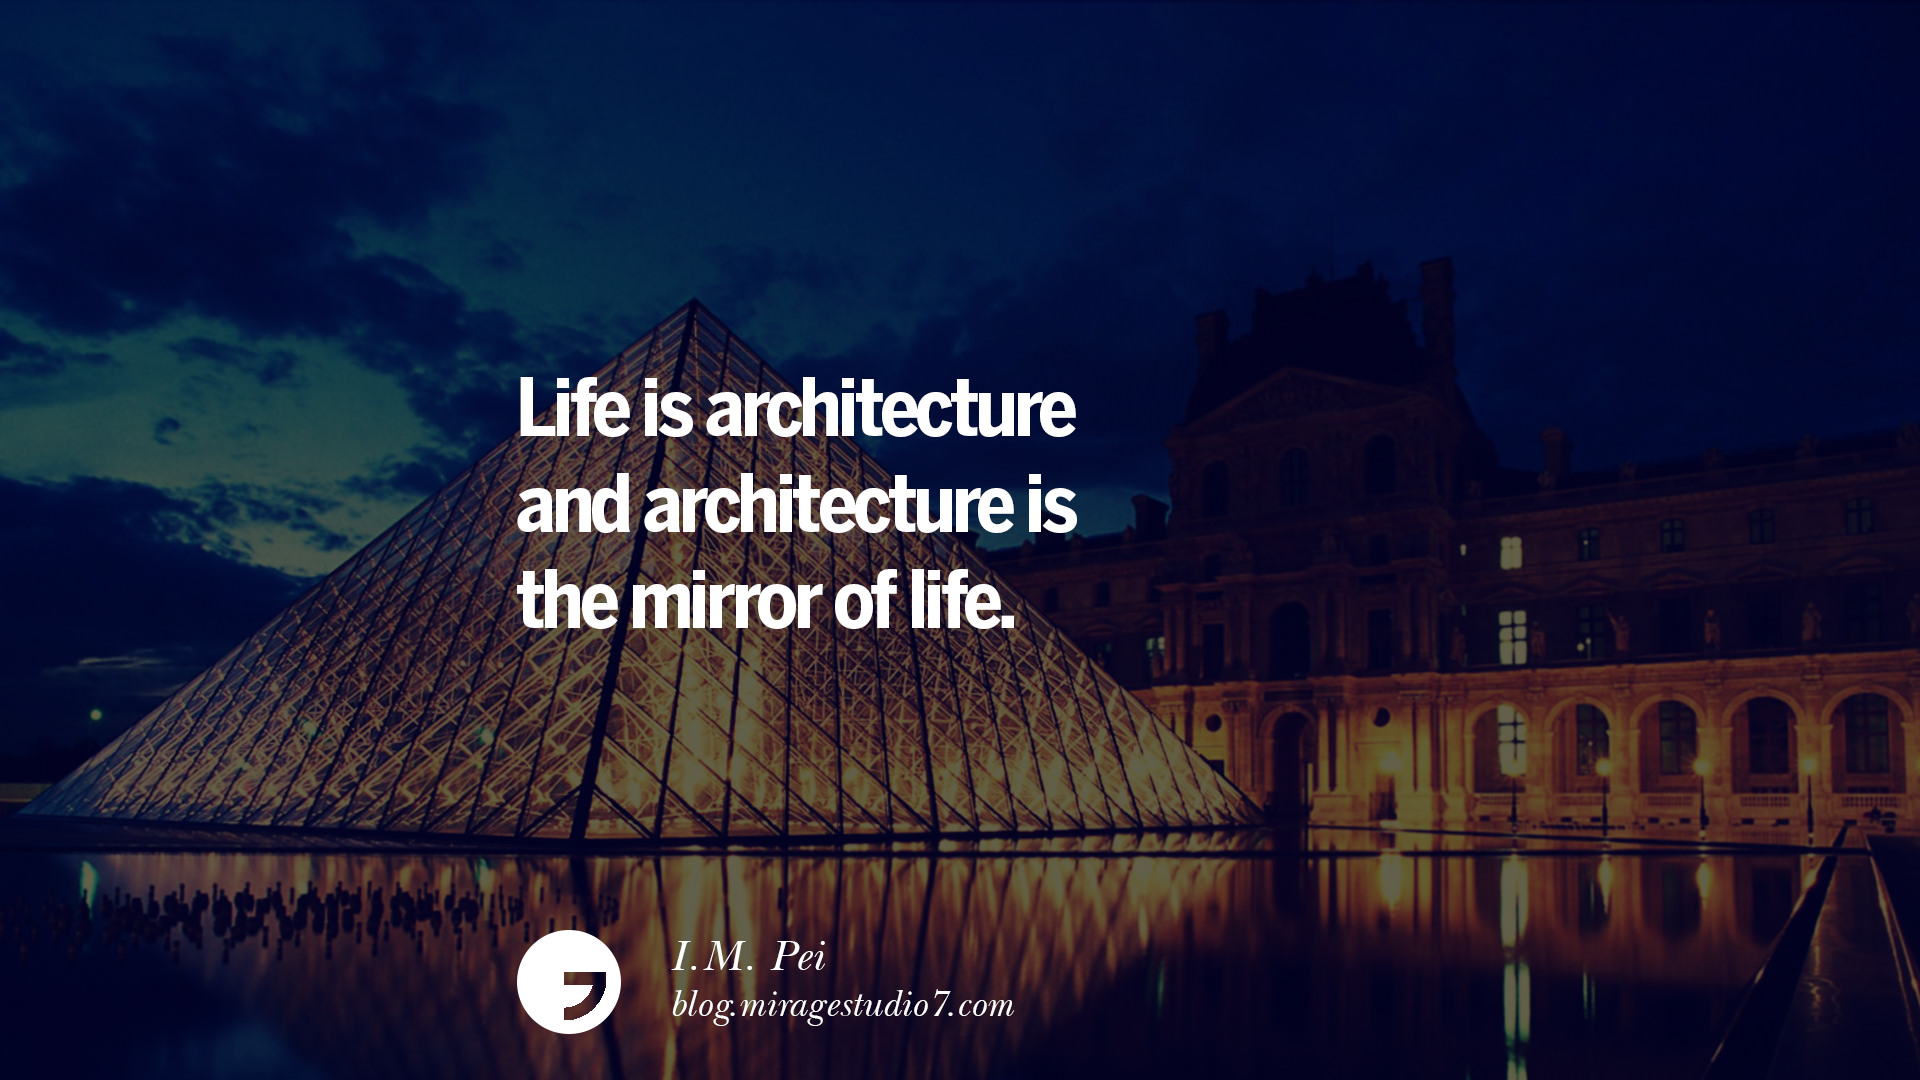 28 Inspirational Architecture Quotes By Famous Architects